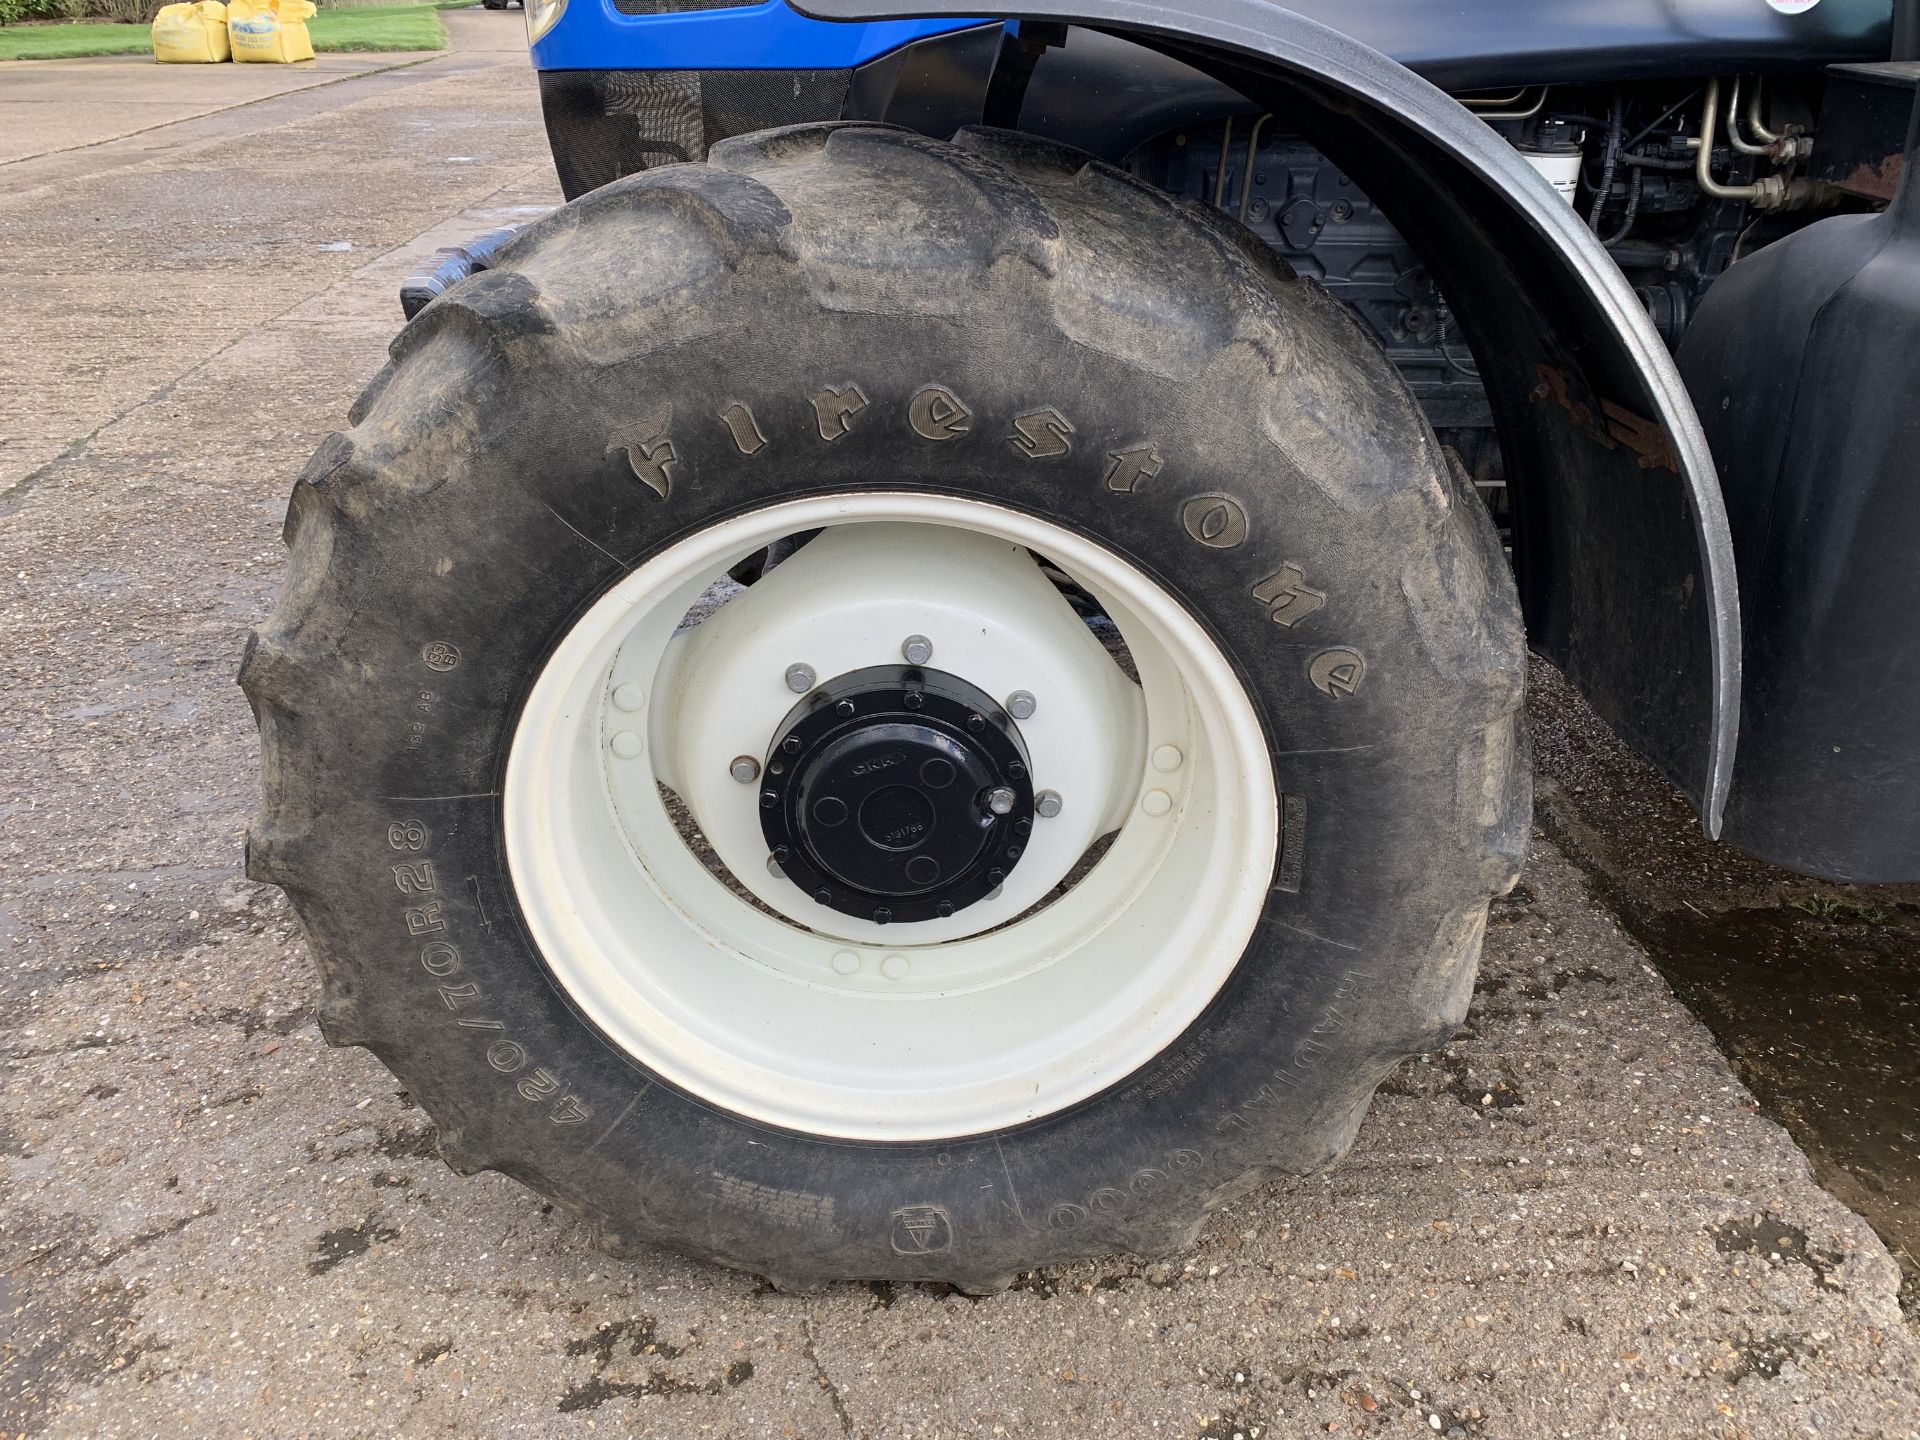 2004 New Holland TS125A tractor YX04 FYU, 5428 hours, 520/70R38 rear and 420/70R28 front tyres with - Image 6 of 8